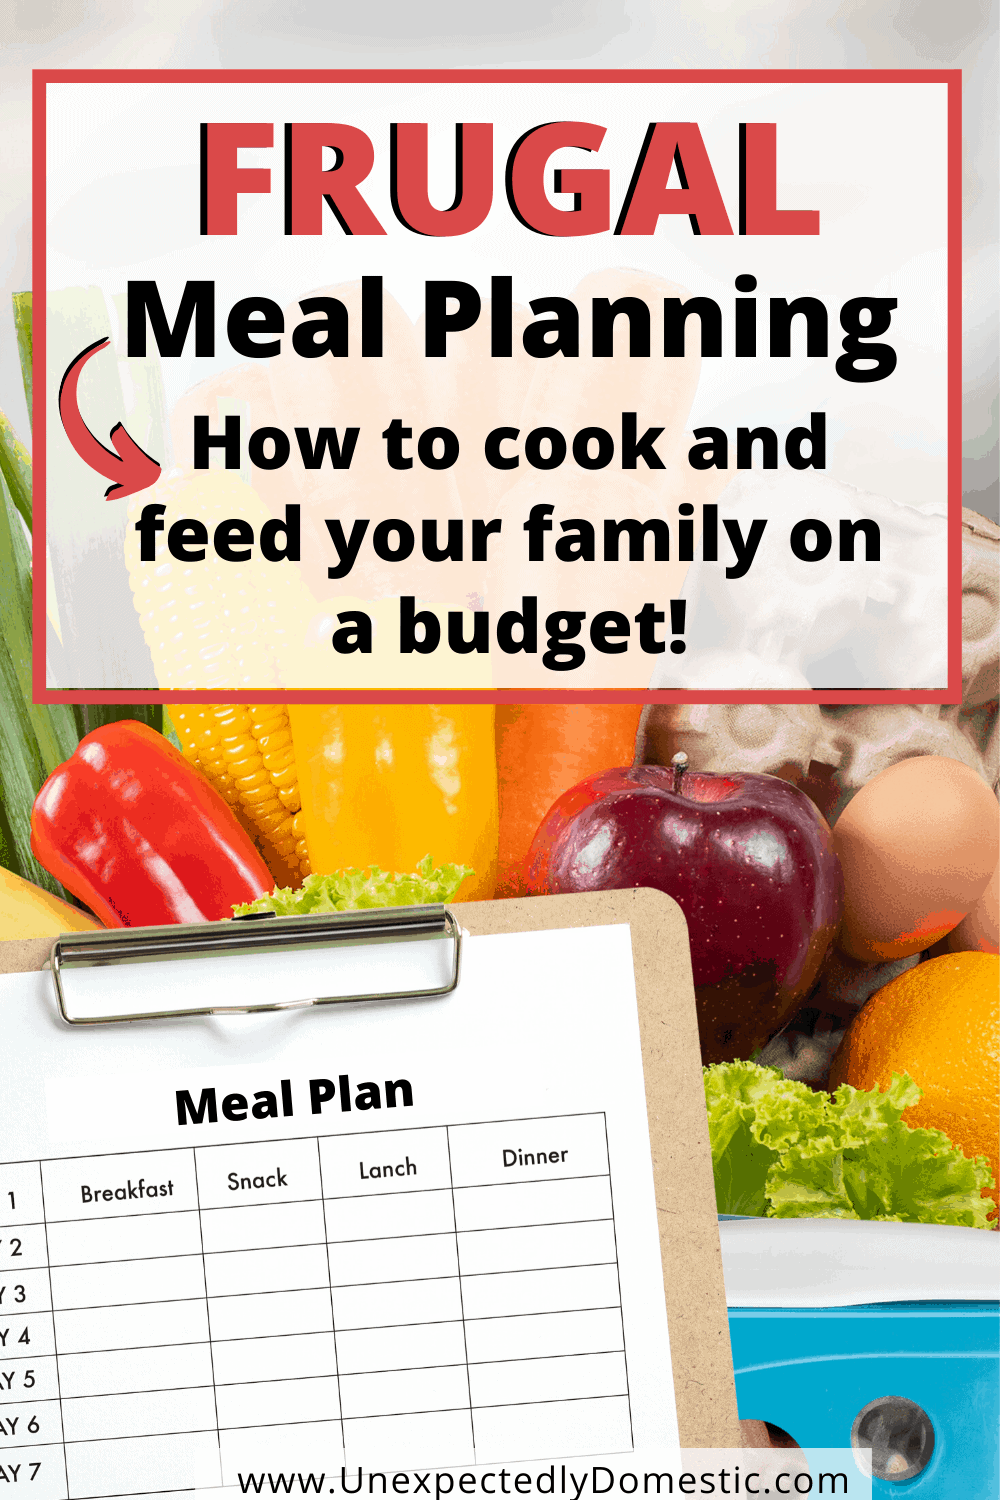 Frugal Meal Planning - Everything You Need to Know to Eat on a Budget